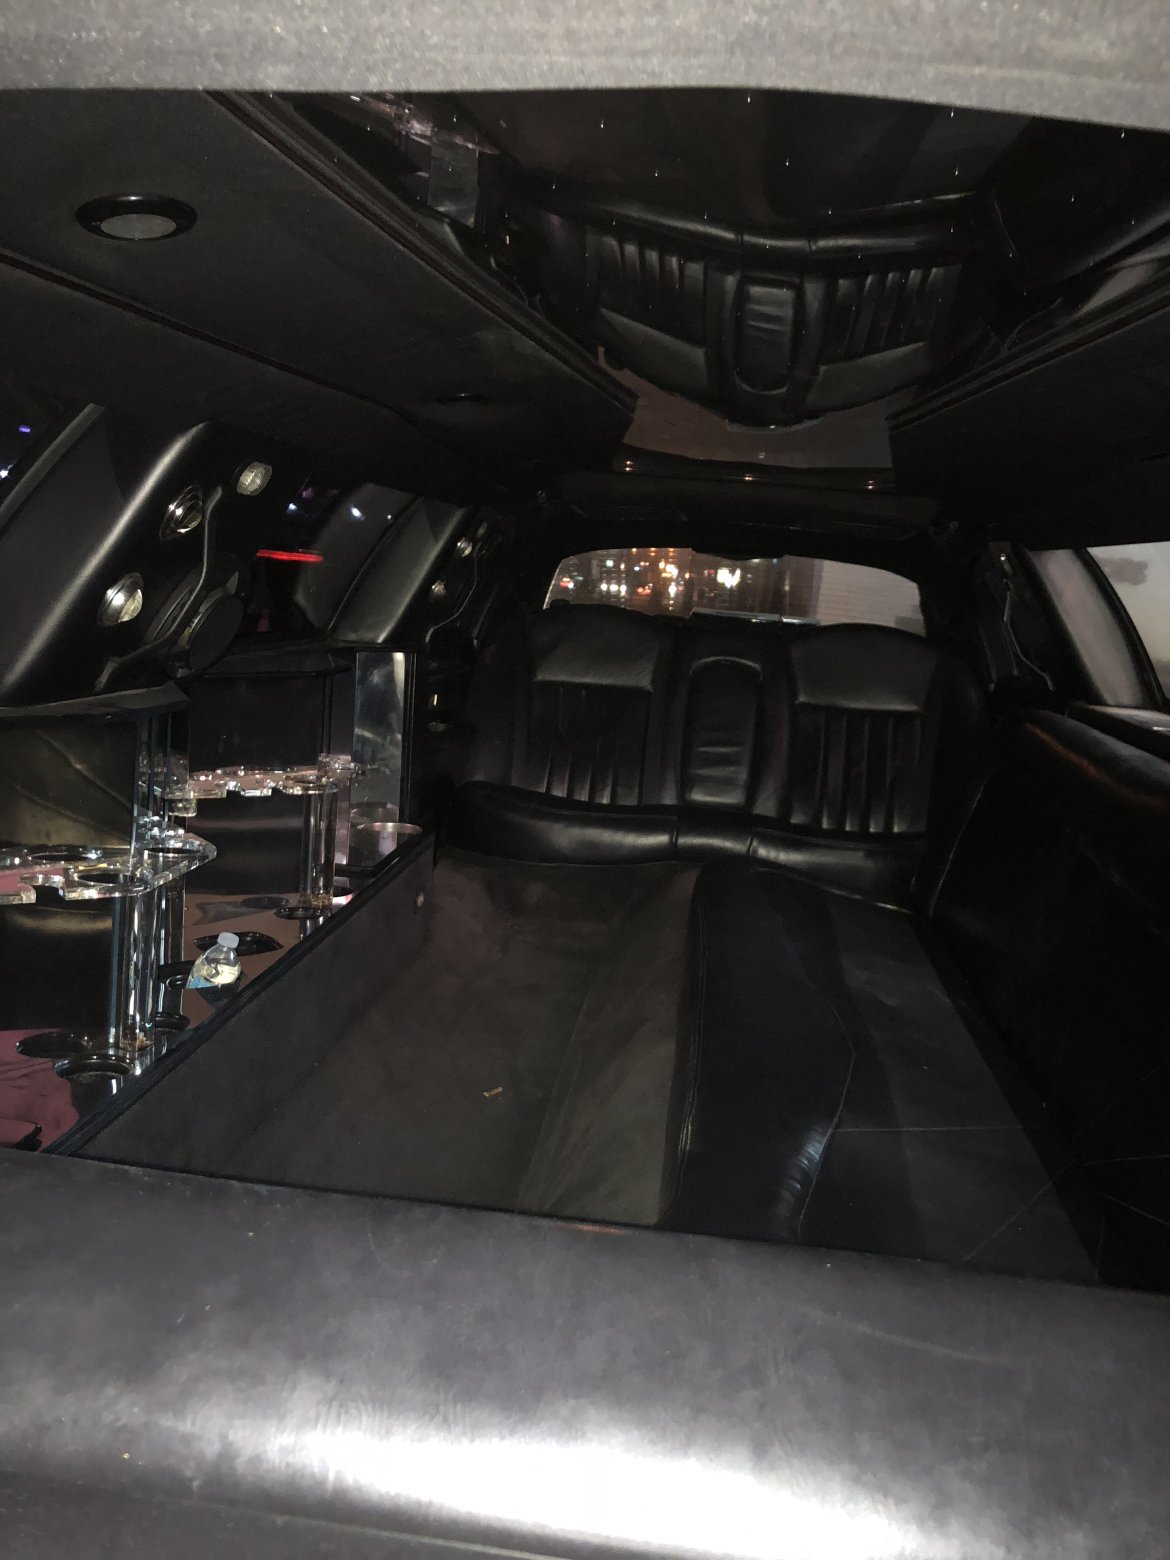 Limousine for sale: 2005 Lincoln Stretch Town Car by Unknown